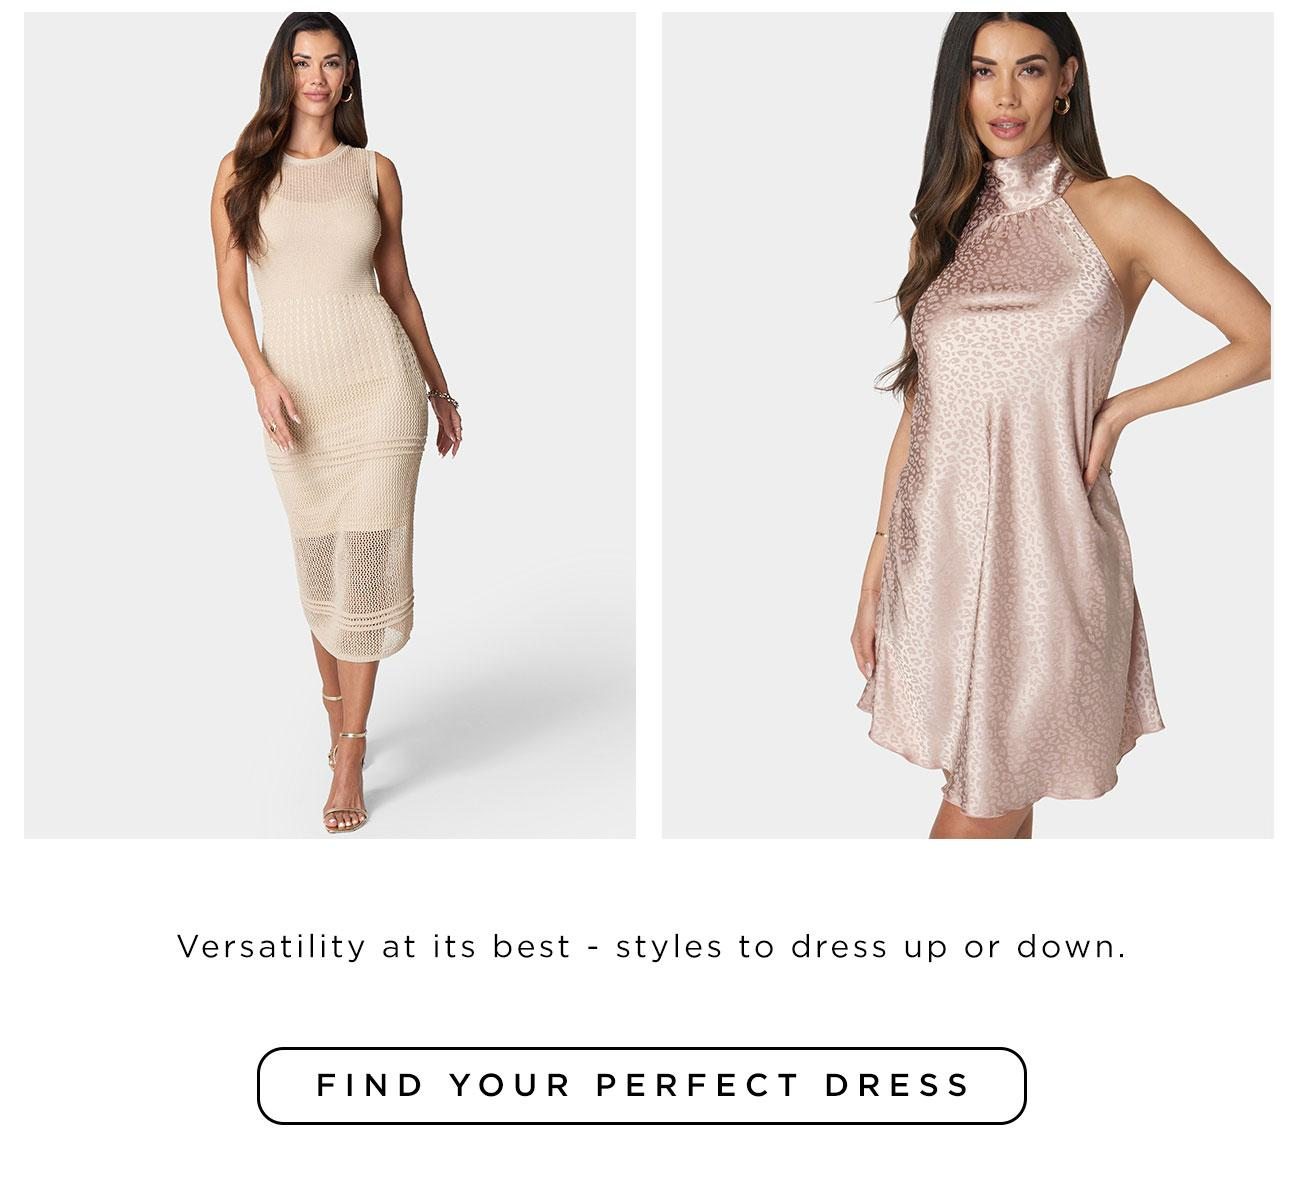 Find Your Perfect Dress